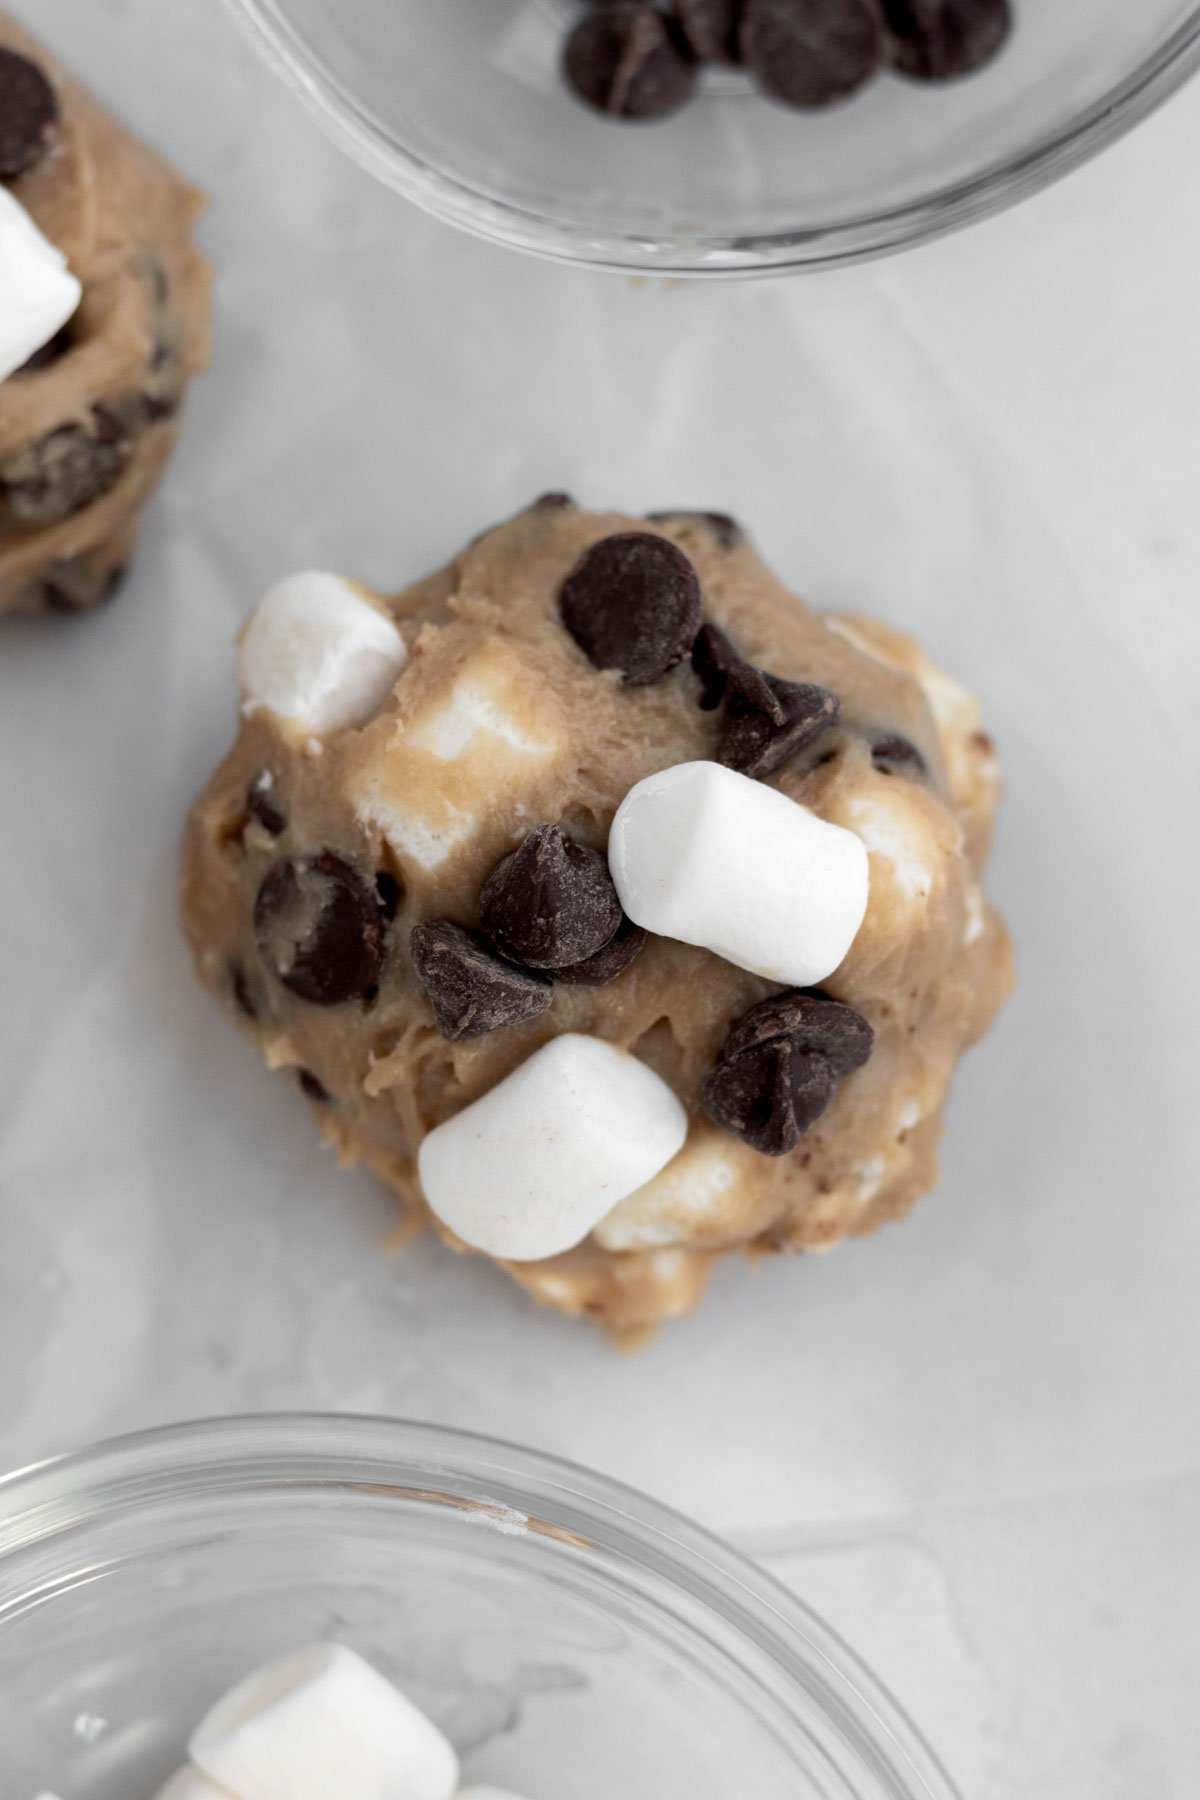 Pressing extra chocolate chips and marshmallows to the cookie dough ball.